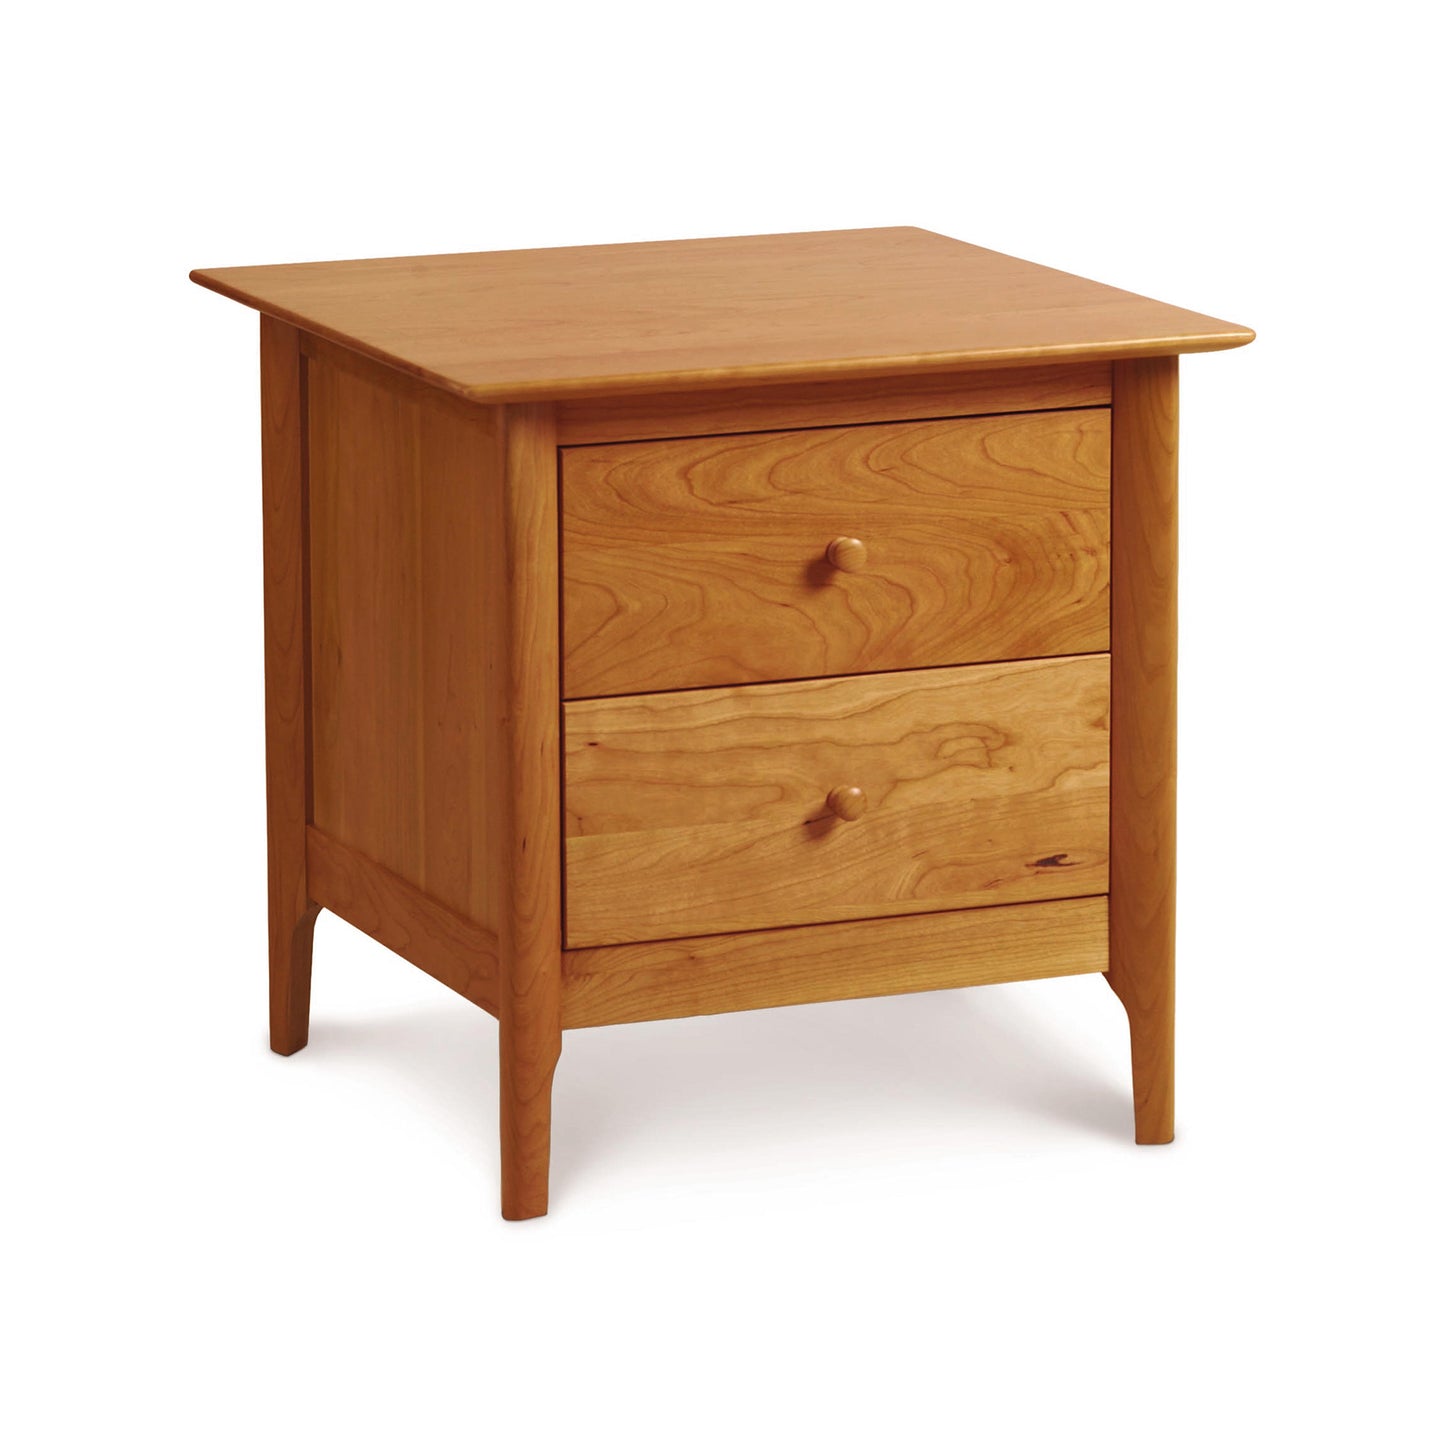 A wooden Sarah 2-Drawer Nightstand, crafted from sustainable harvested wood, isolated on a white background by Copeland Furniture.